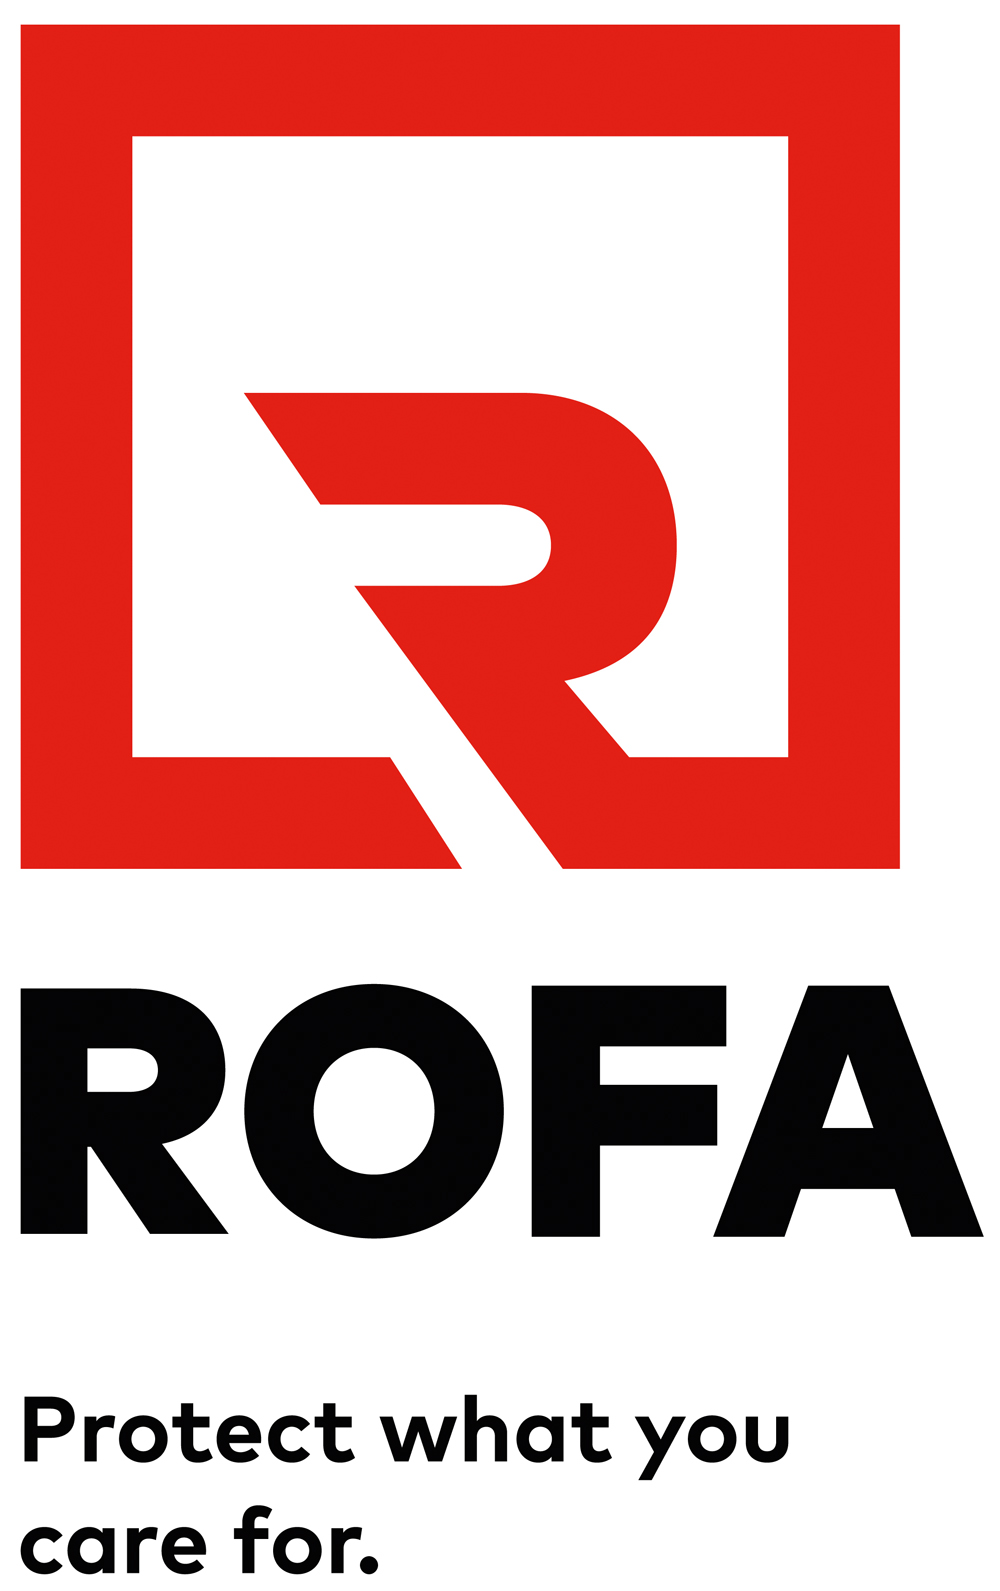 Logo: ROFA mit Slogan "Protect what you care for."